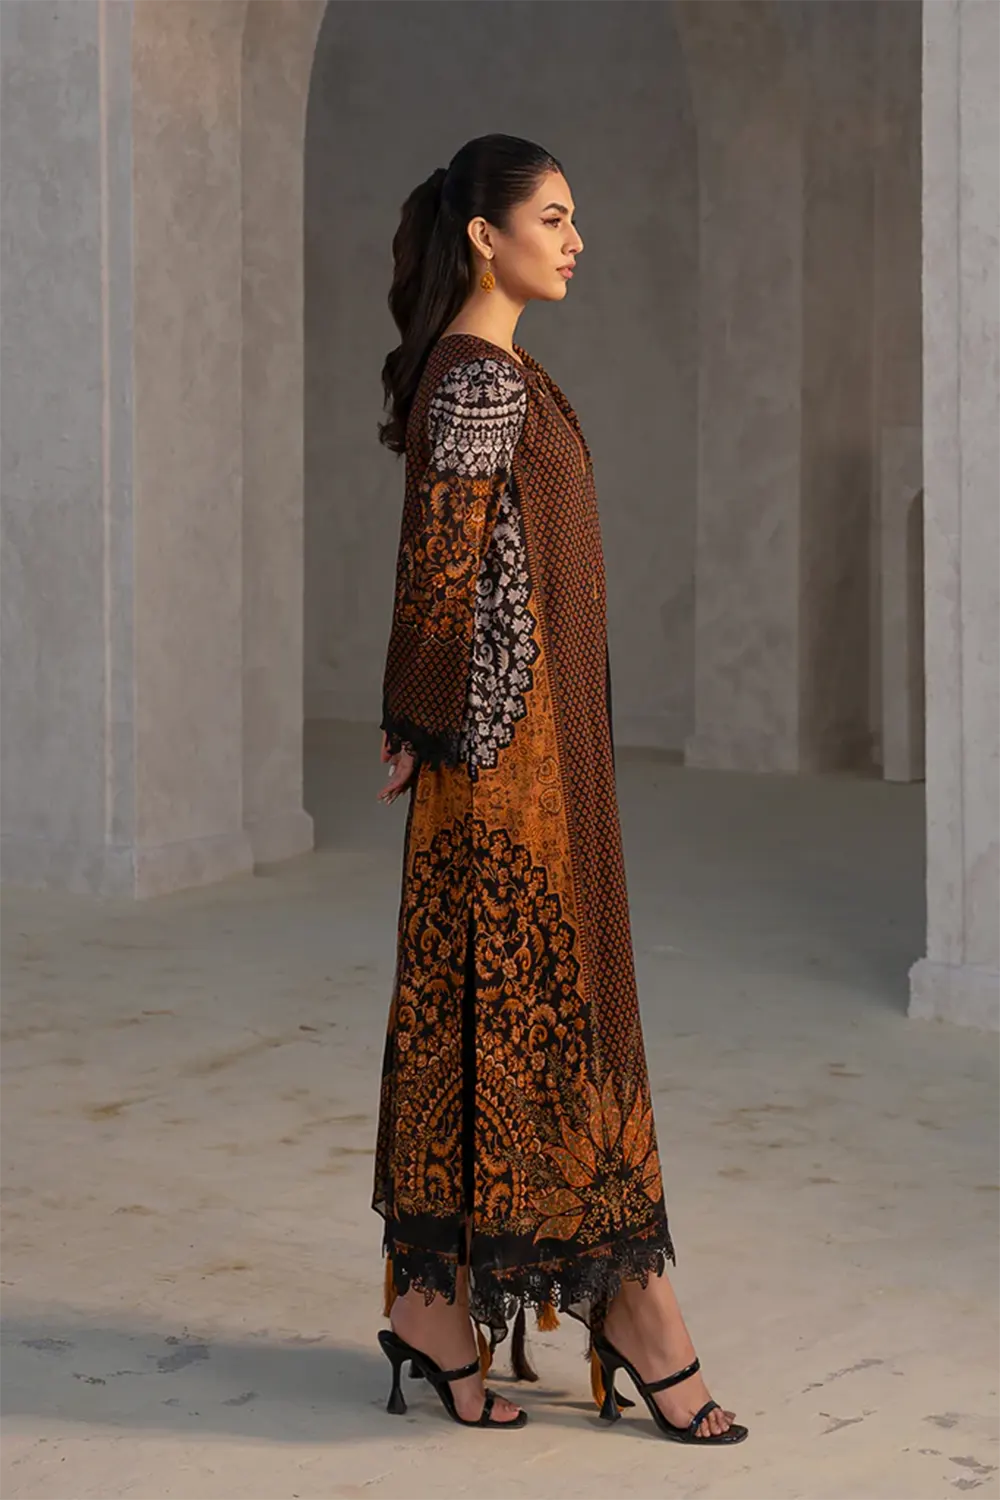 3-PC Unstitched Printed Lawn Shirt with Chiffon Dupatta and Trouser CP4-27 by Chrizma